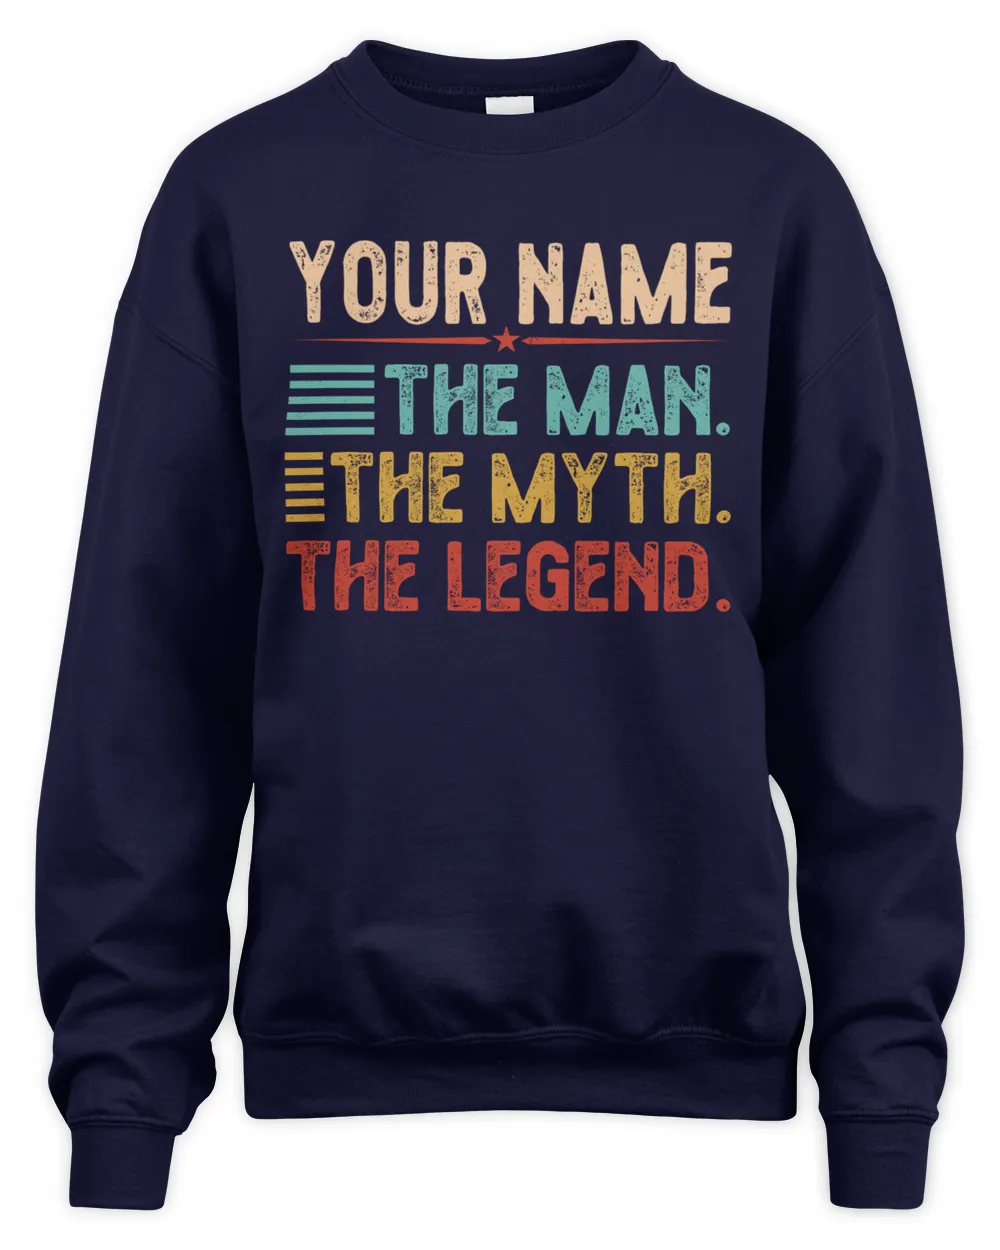 YOUR NAME. The Man. The Myth. The Legend. Great personalised T-Shirts